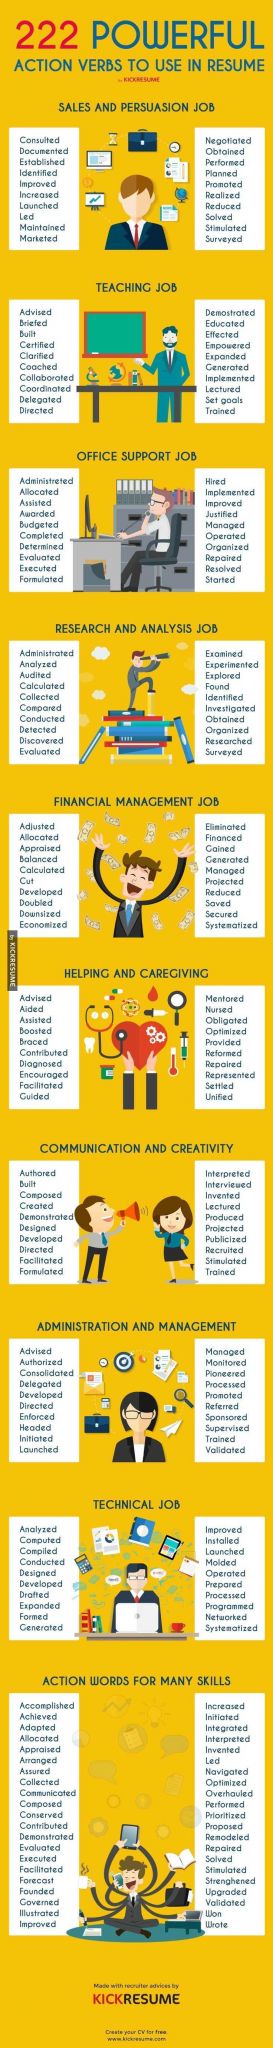 Character Traits Worksheet 3rd Grade Along with Beautiful Image Result for Sensory Writing Worksheets 3rd Grade